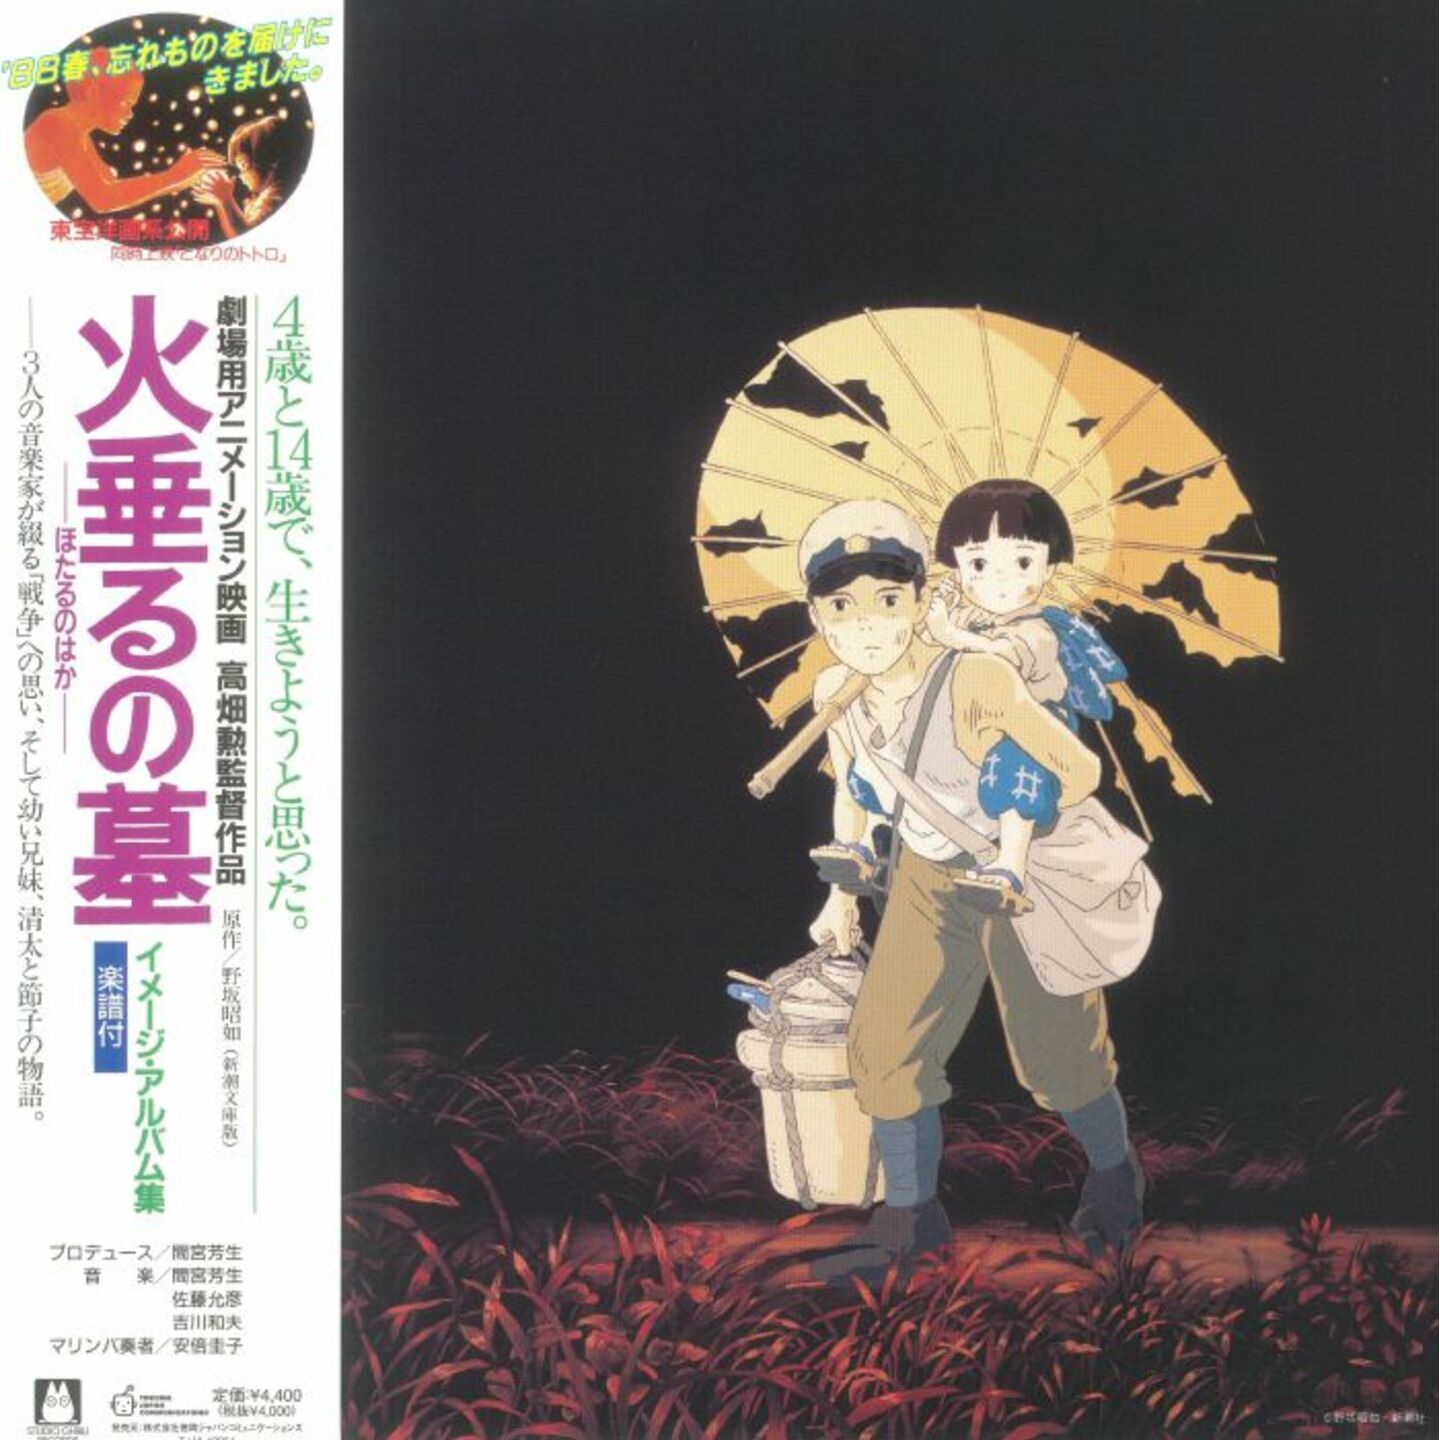 V/A - Grave Of The Fireflies: Image Album Collection LP